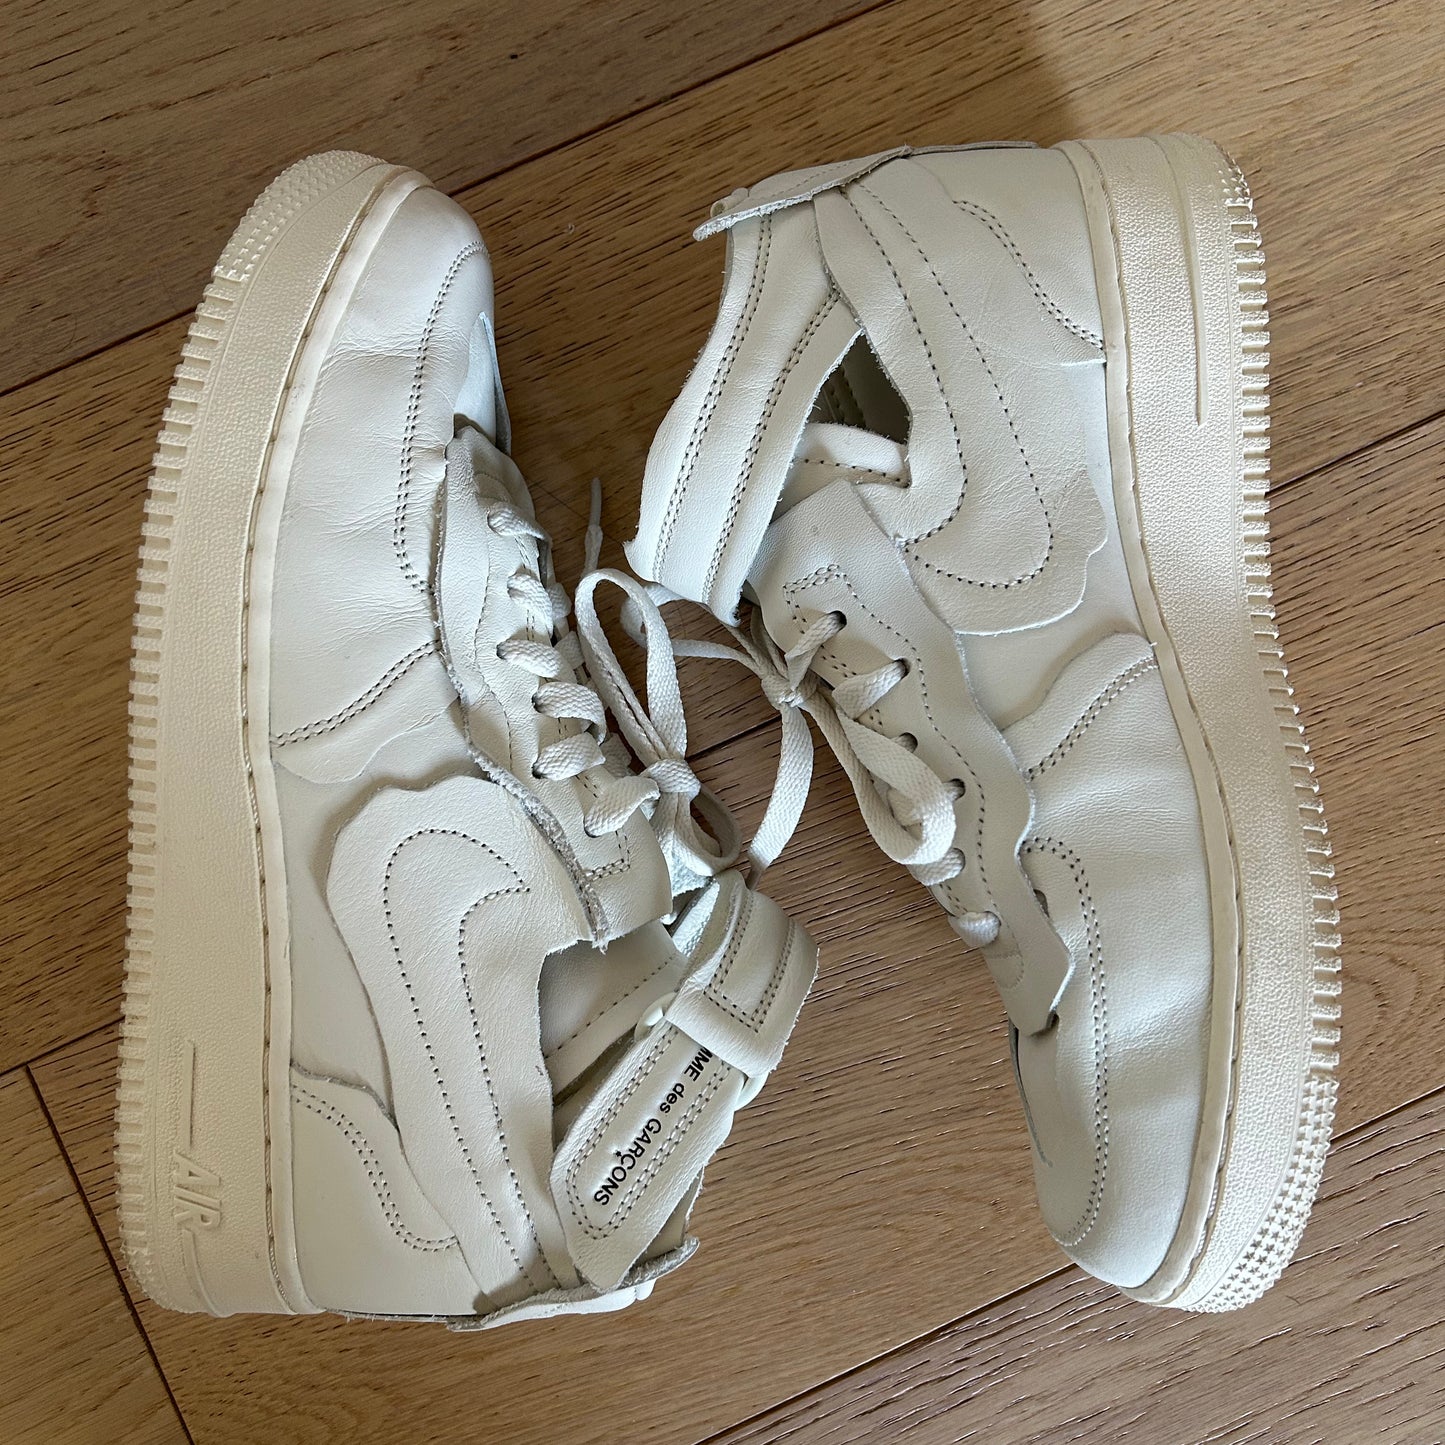 CDG x Nike Air Force One, size 8.5